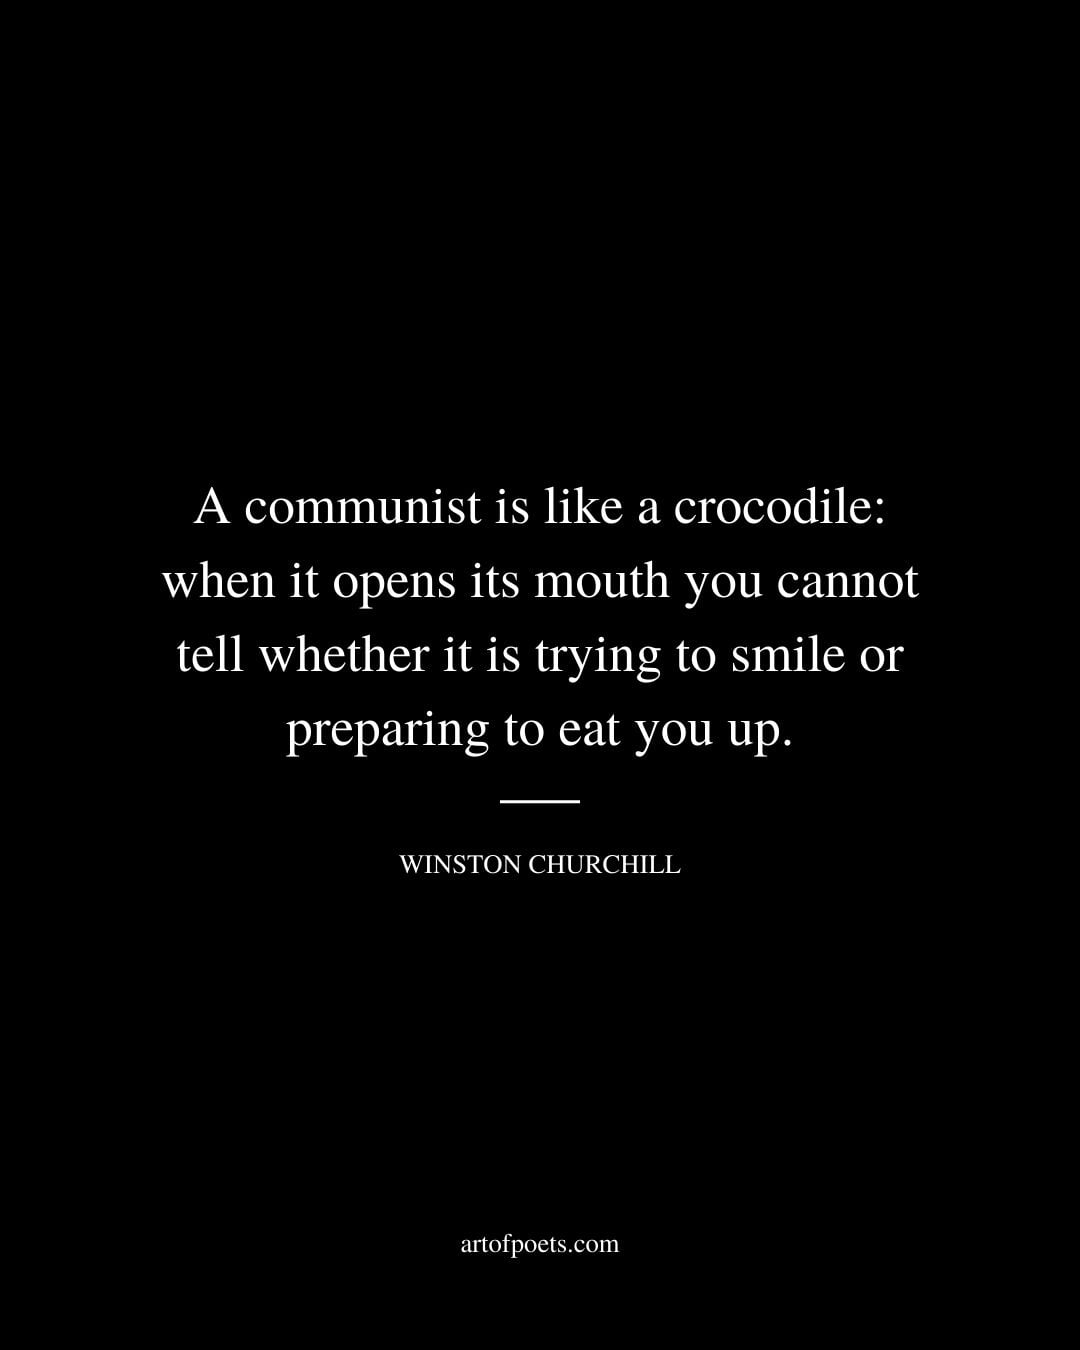 A communist is like a crocodile when it opens its mouth you cannot tell whether it is trying to smile or preparing to eat you up